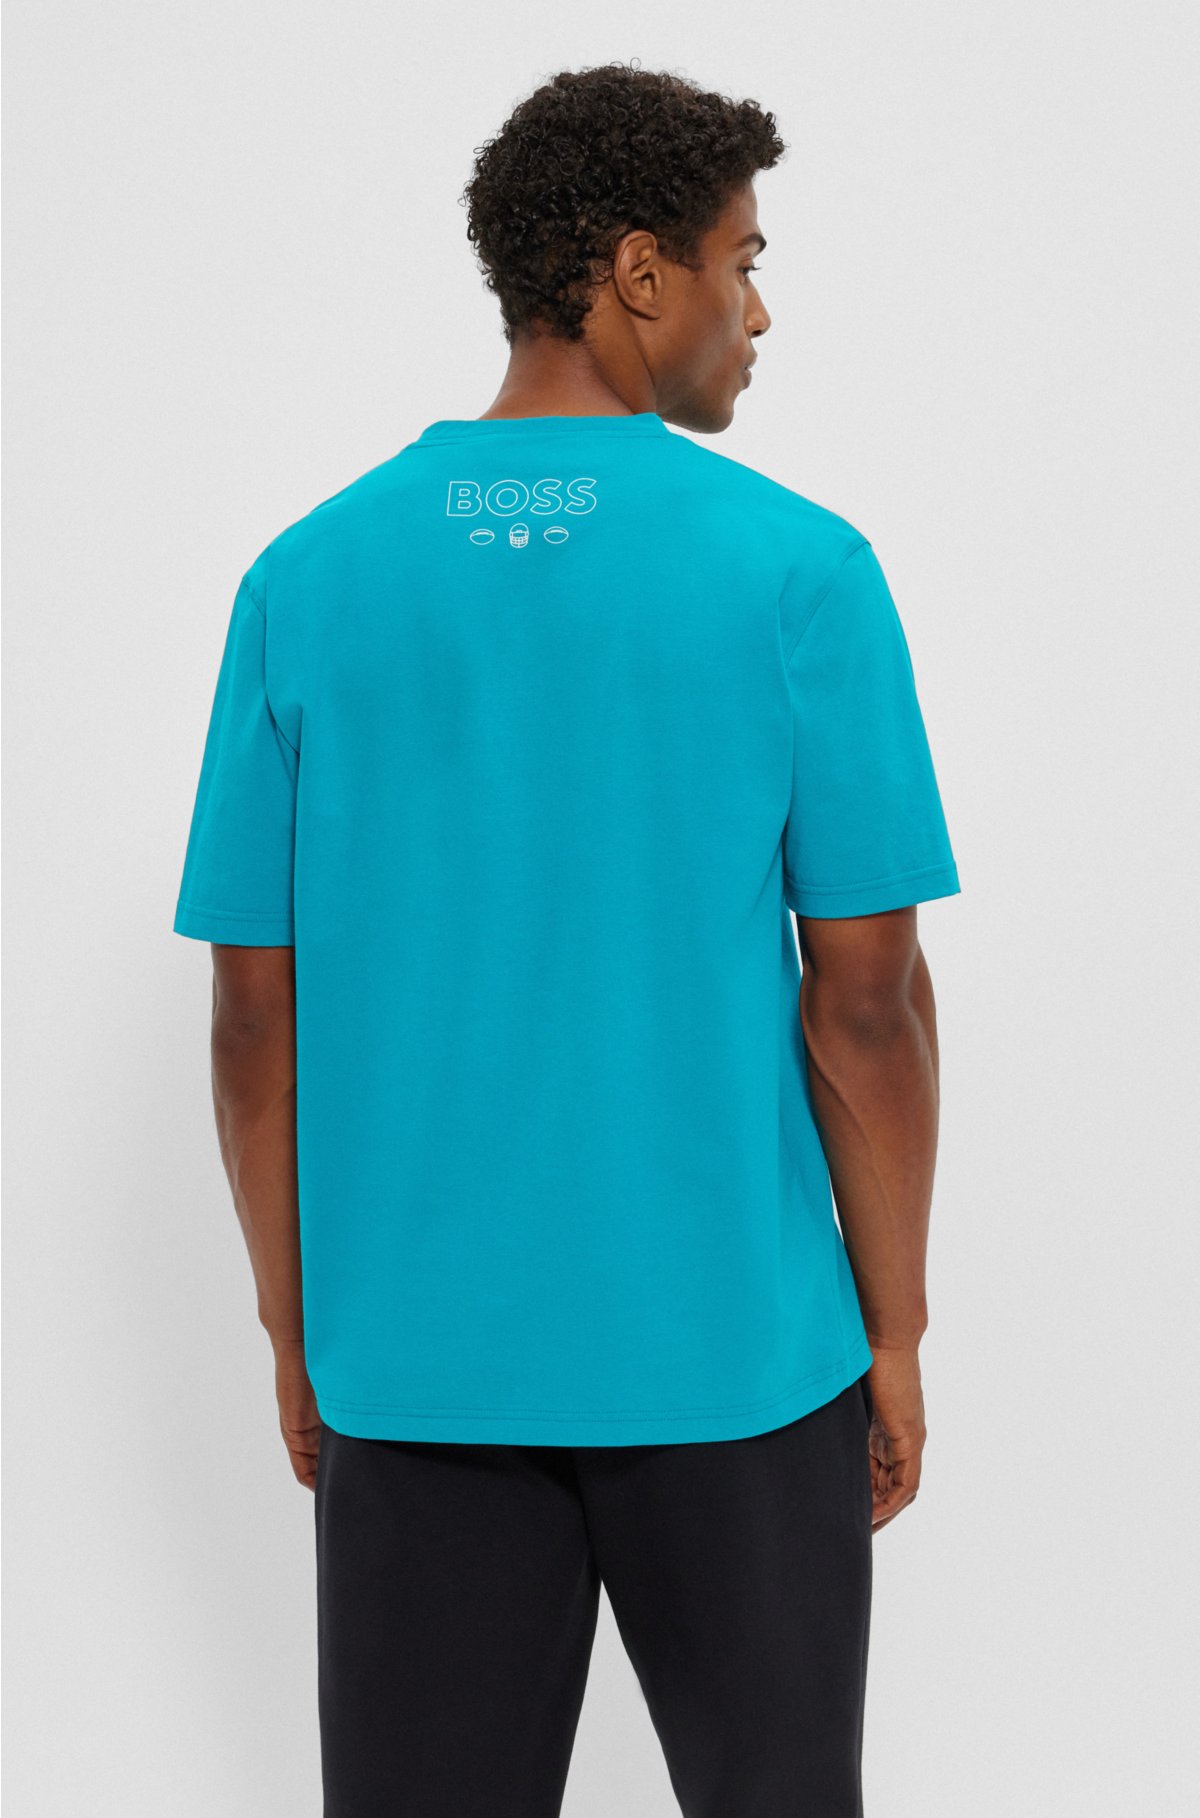  BOSS x NFL stretch-cotton T-shirt with collaborative branding, Dolphins